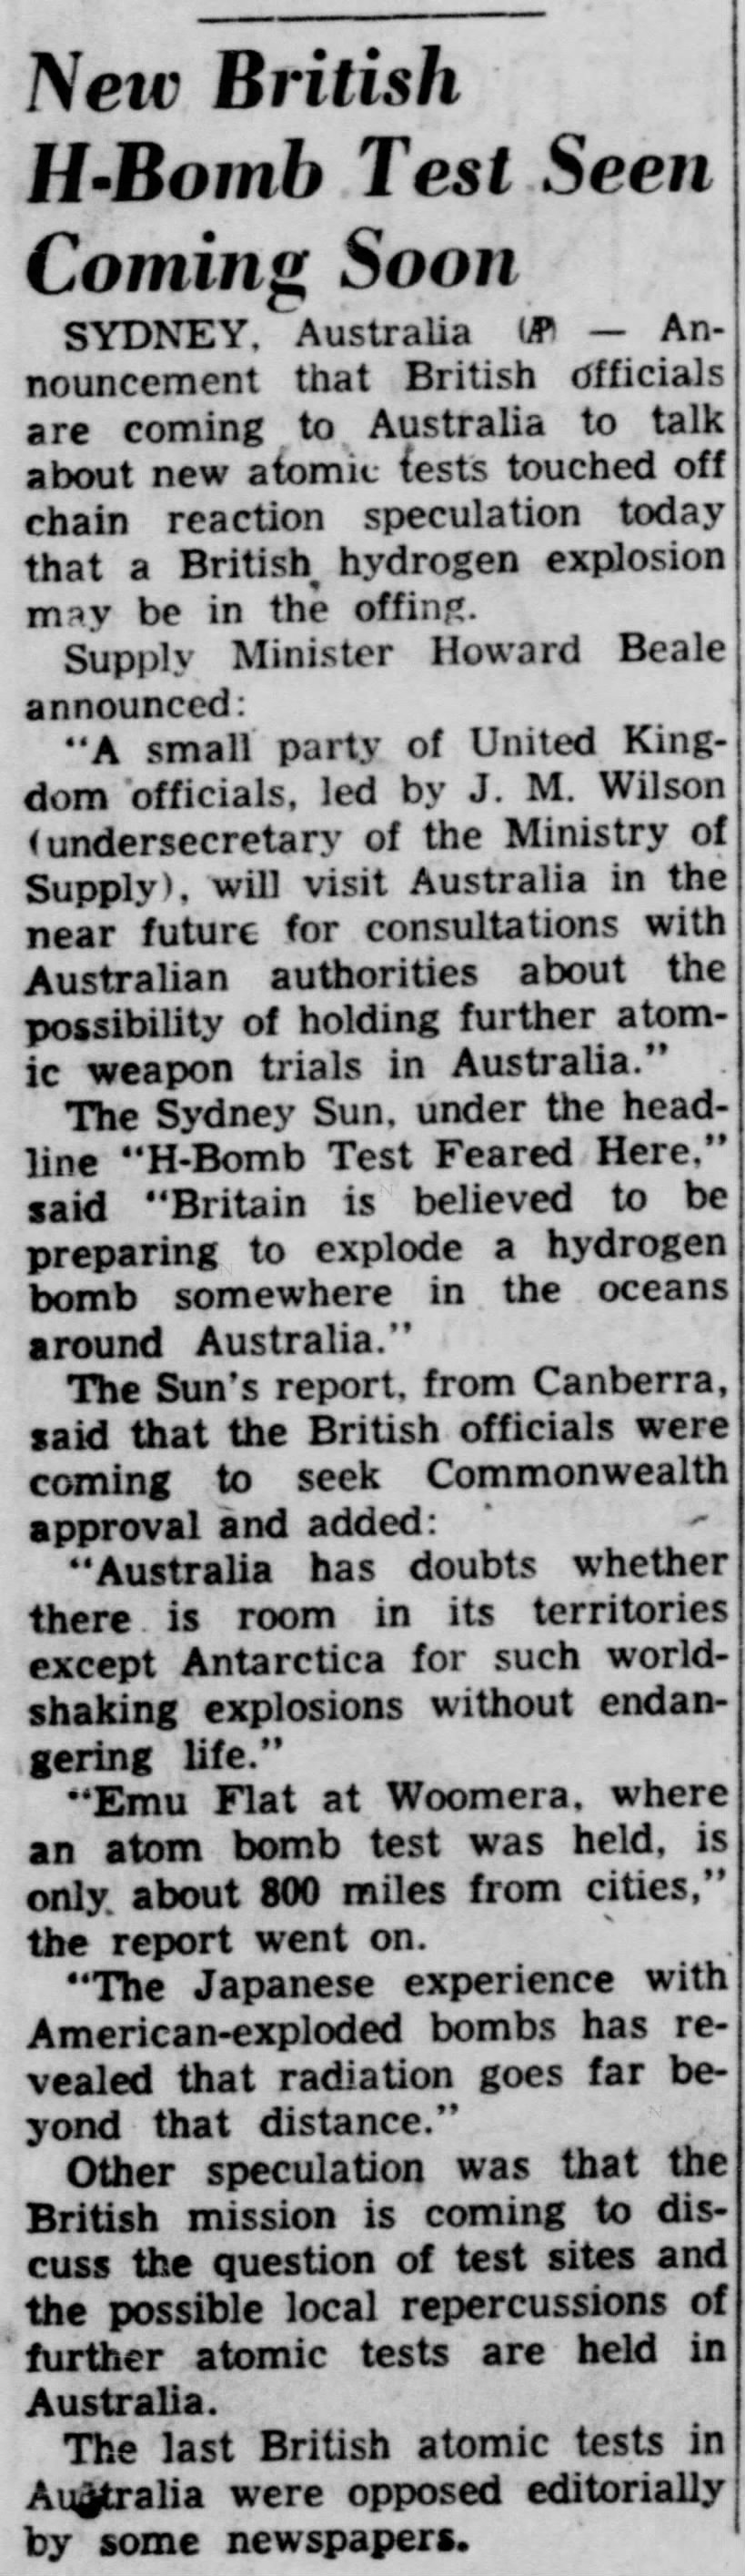 British to visit Australia and discuss nuclear weapons testing in Australia, 1954